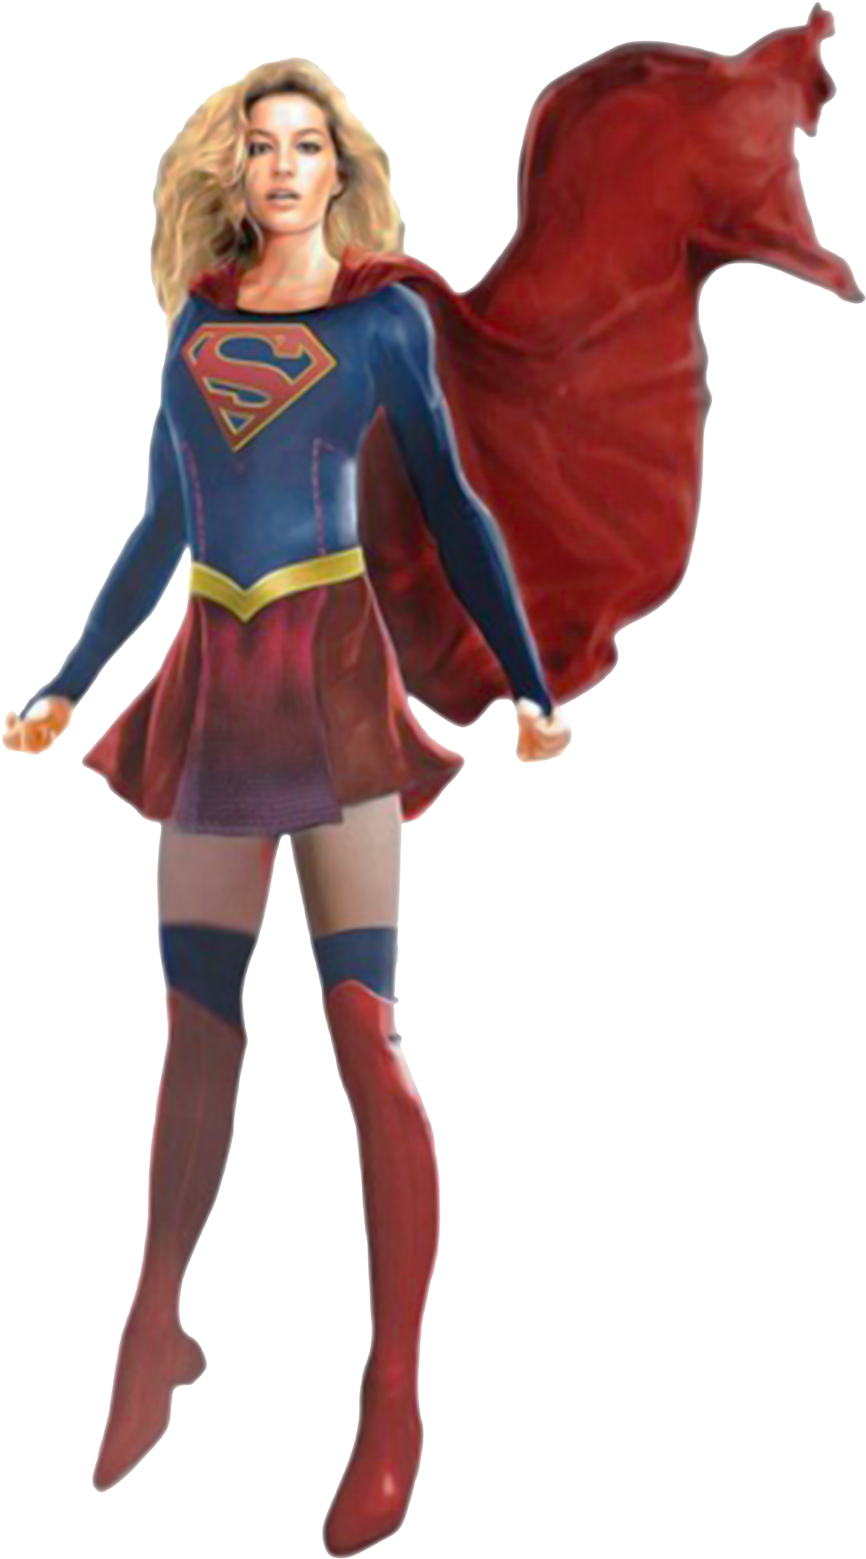 Official Supergirl Concept Art By Trickarrowdesigns - Supergirl Costume Adult (1024x1583)